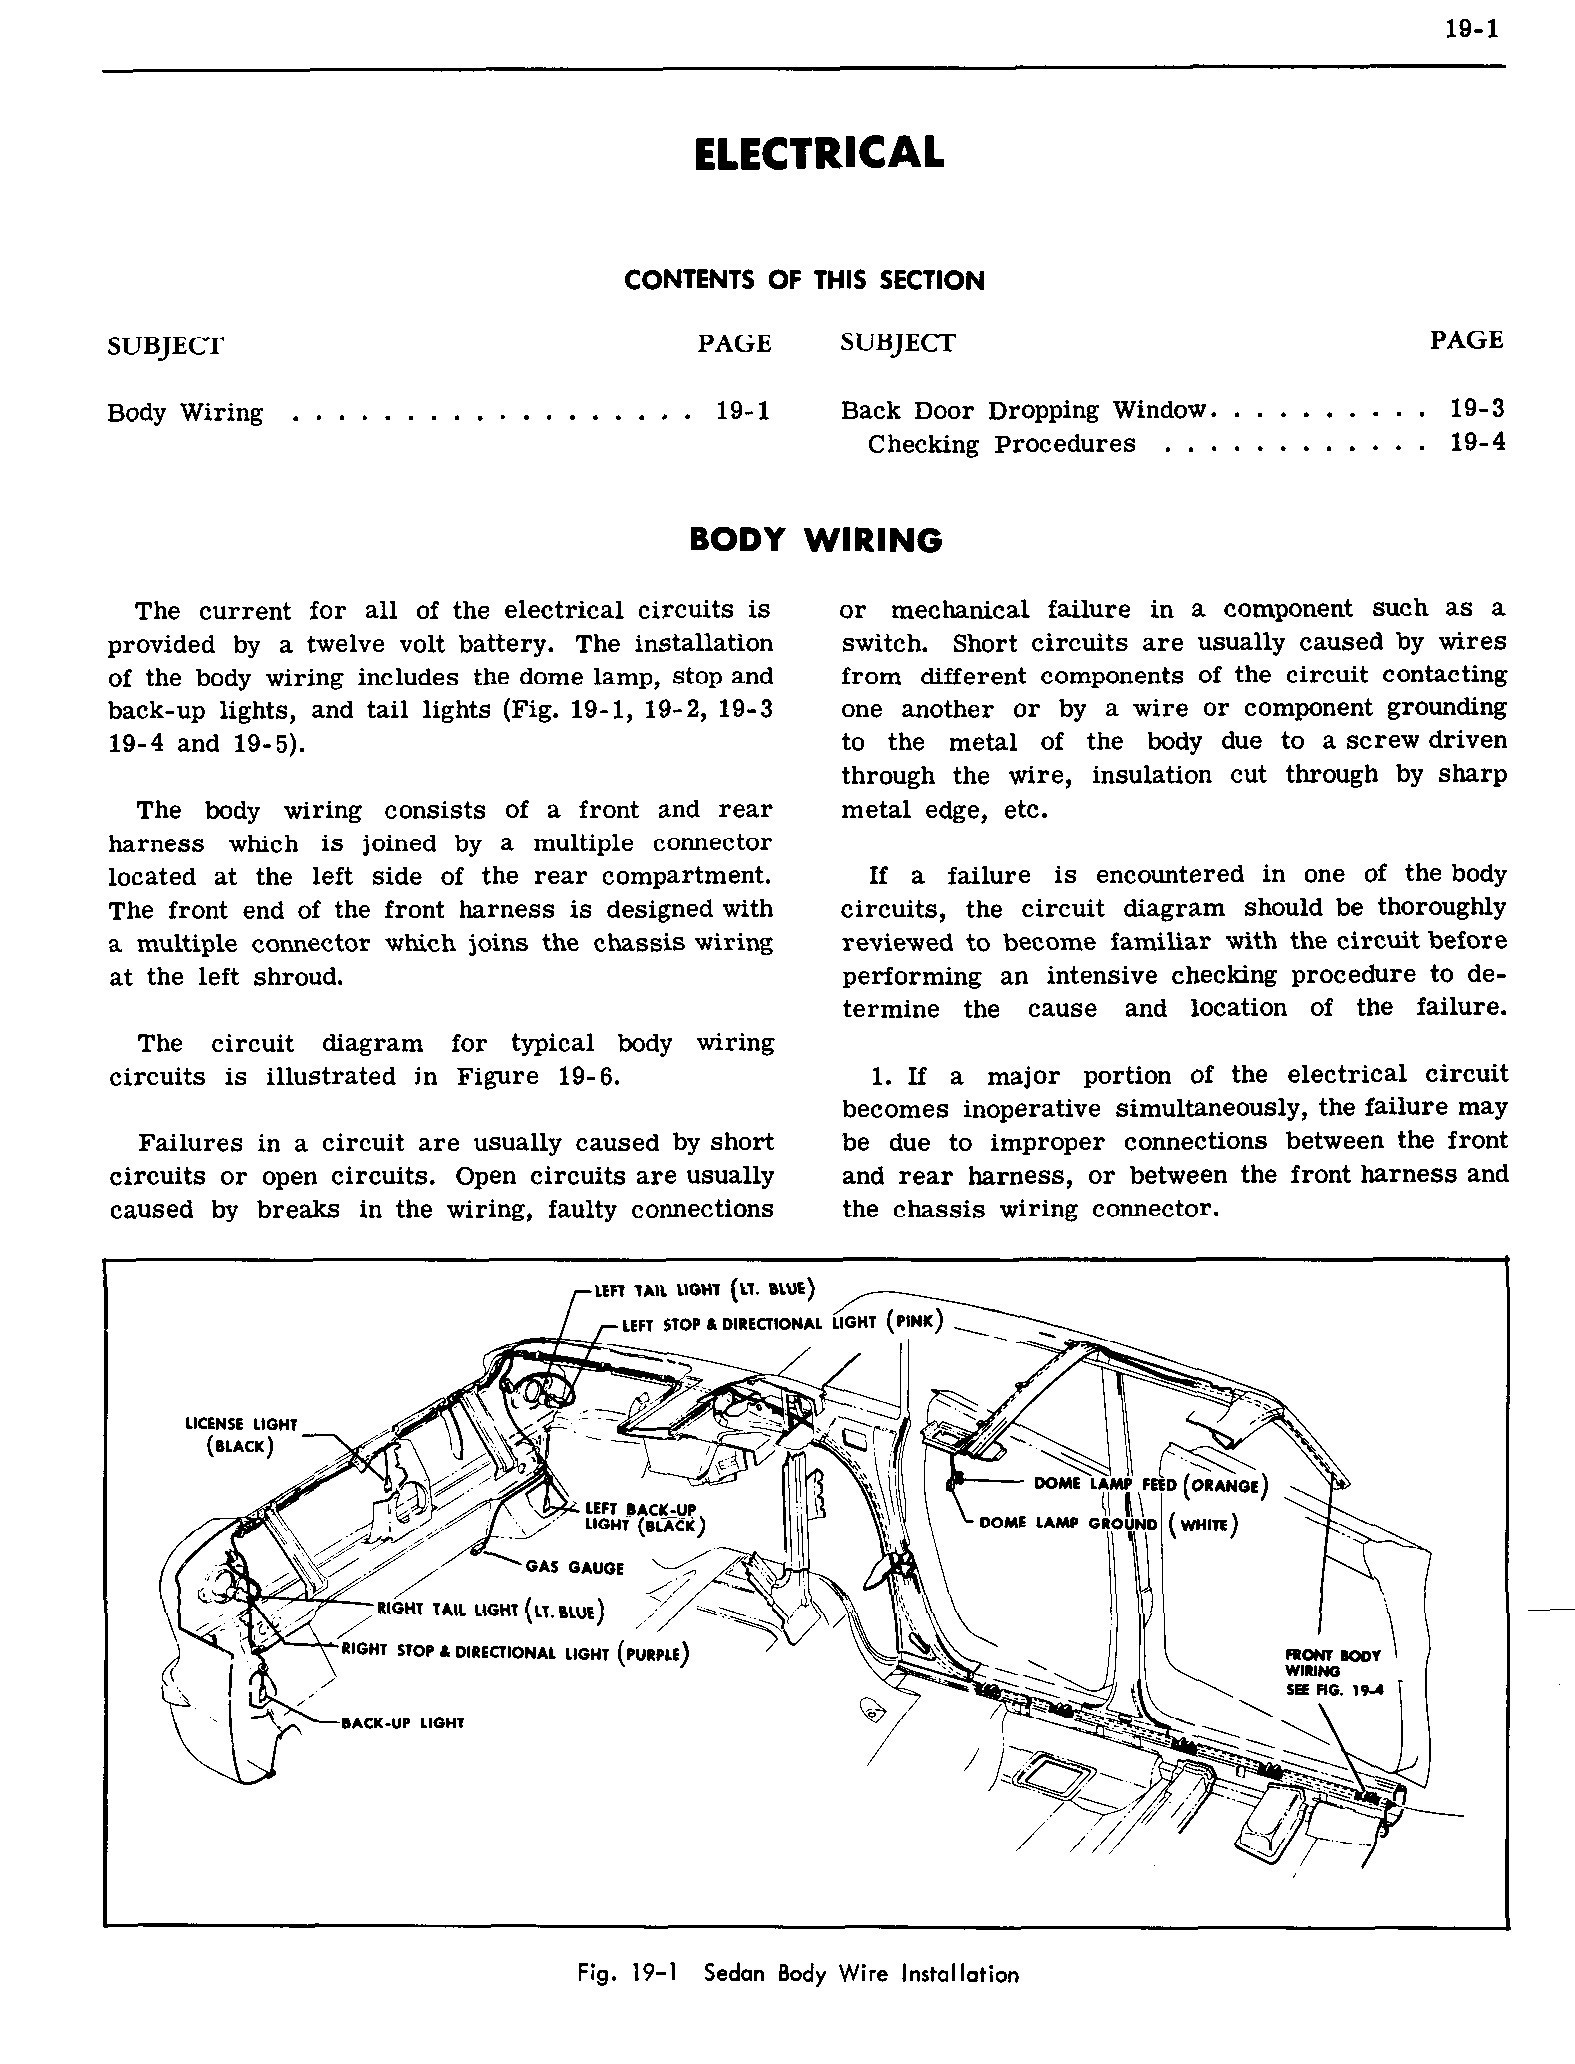 1962 Pontiac Shop Manual- Tempest Electrical Page 1 of 5